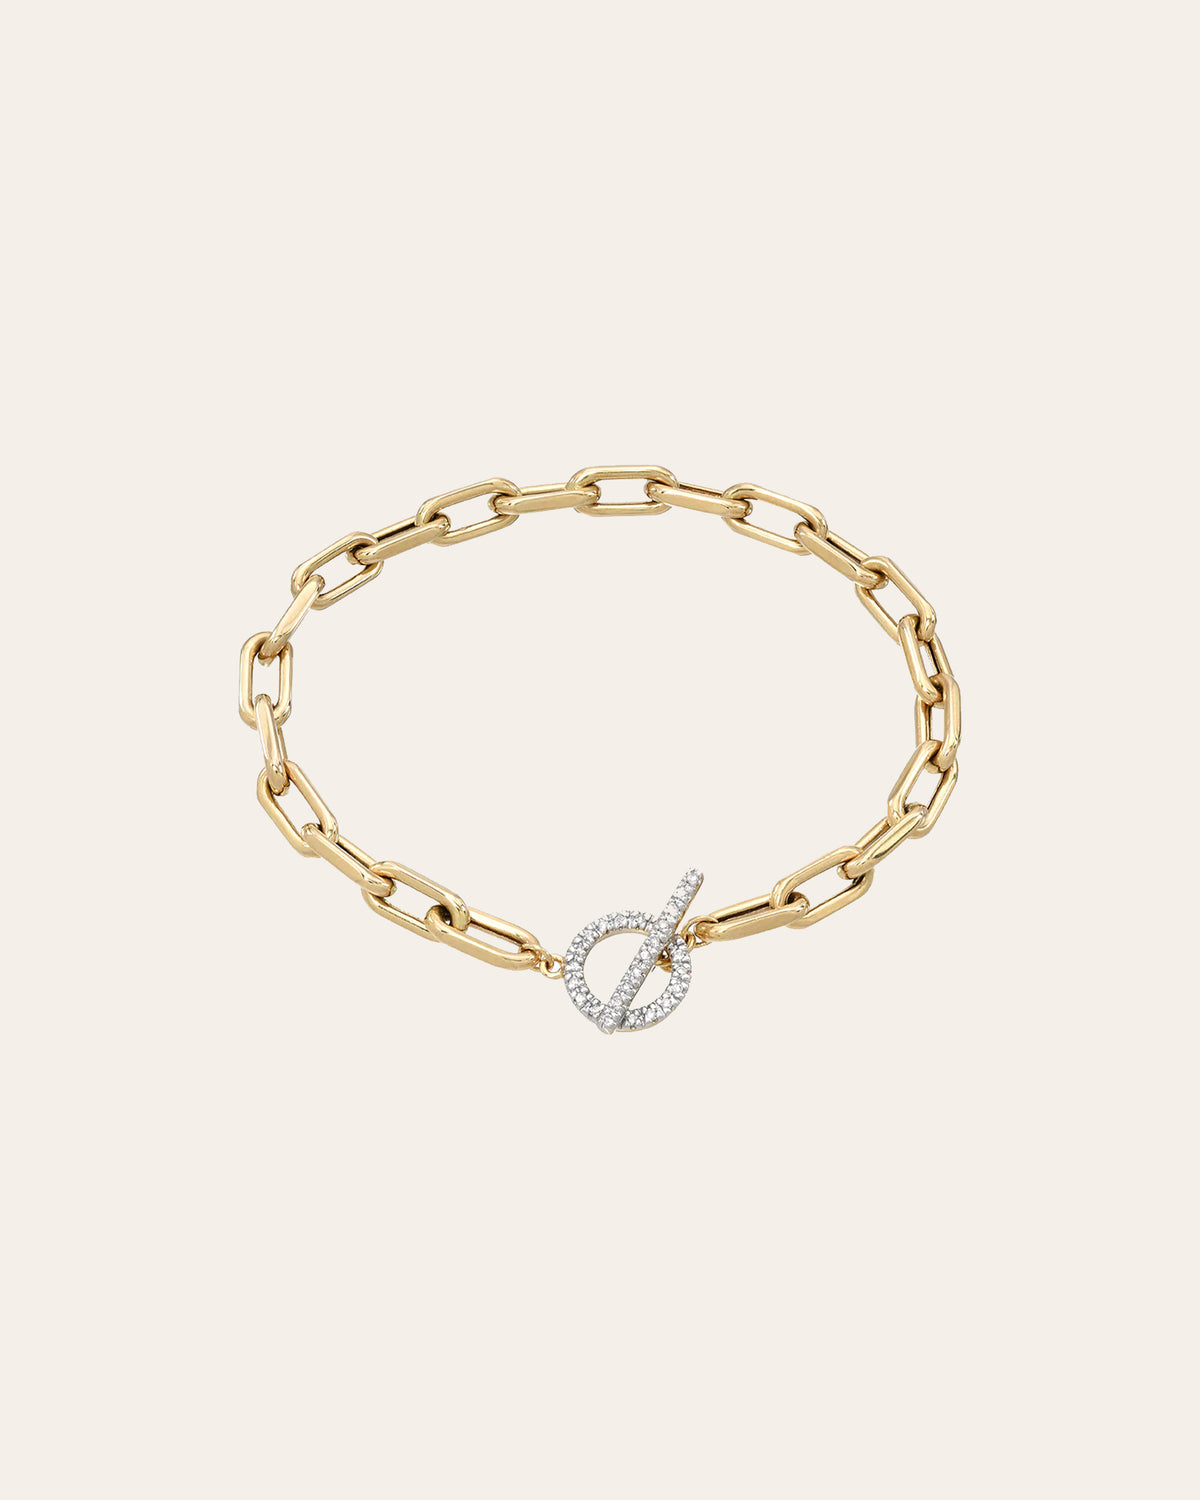 14k Gold Large Open Link Chain Bracelet with Diamond Toggle